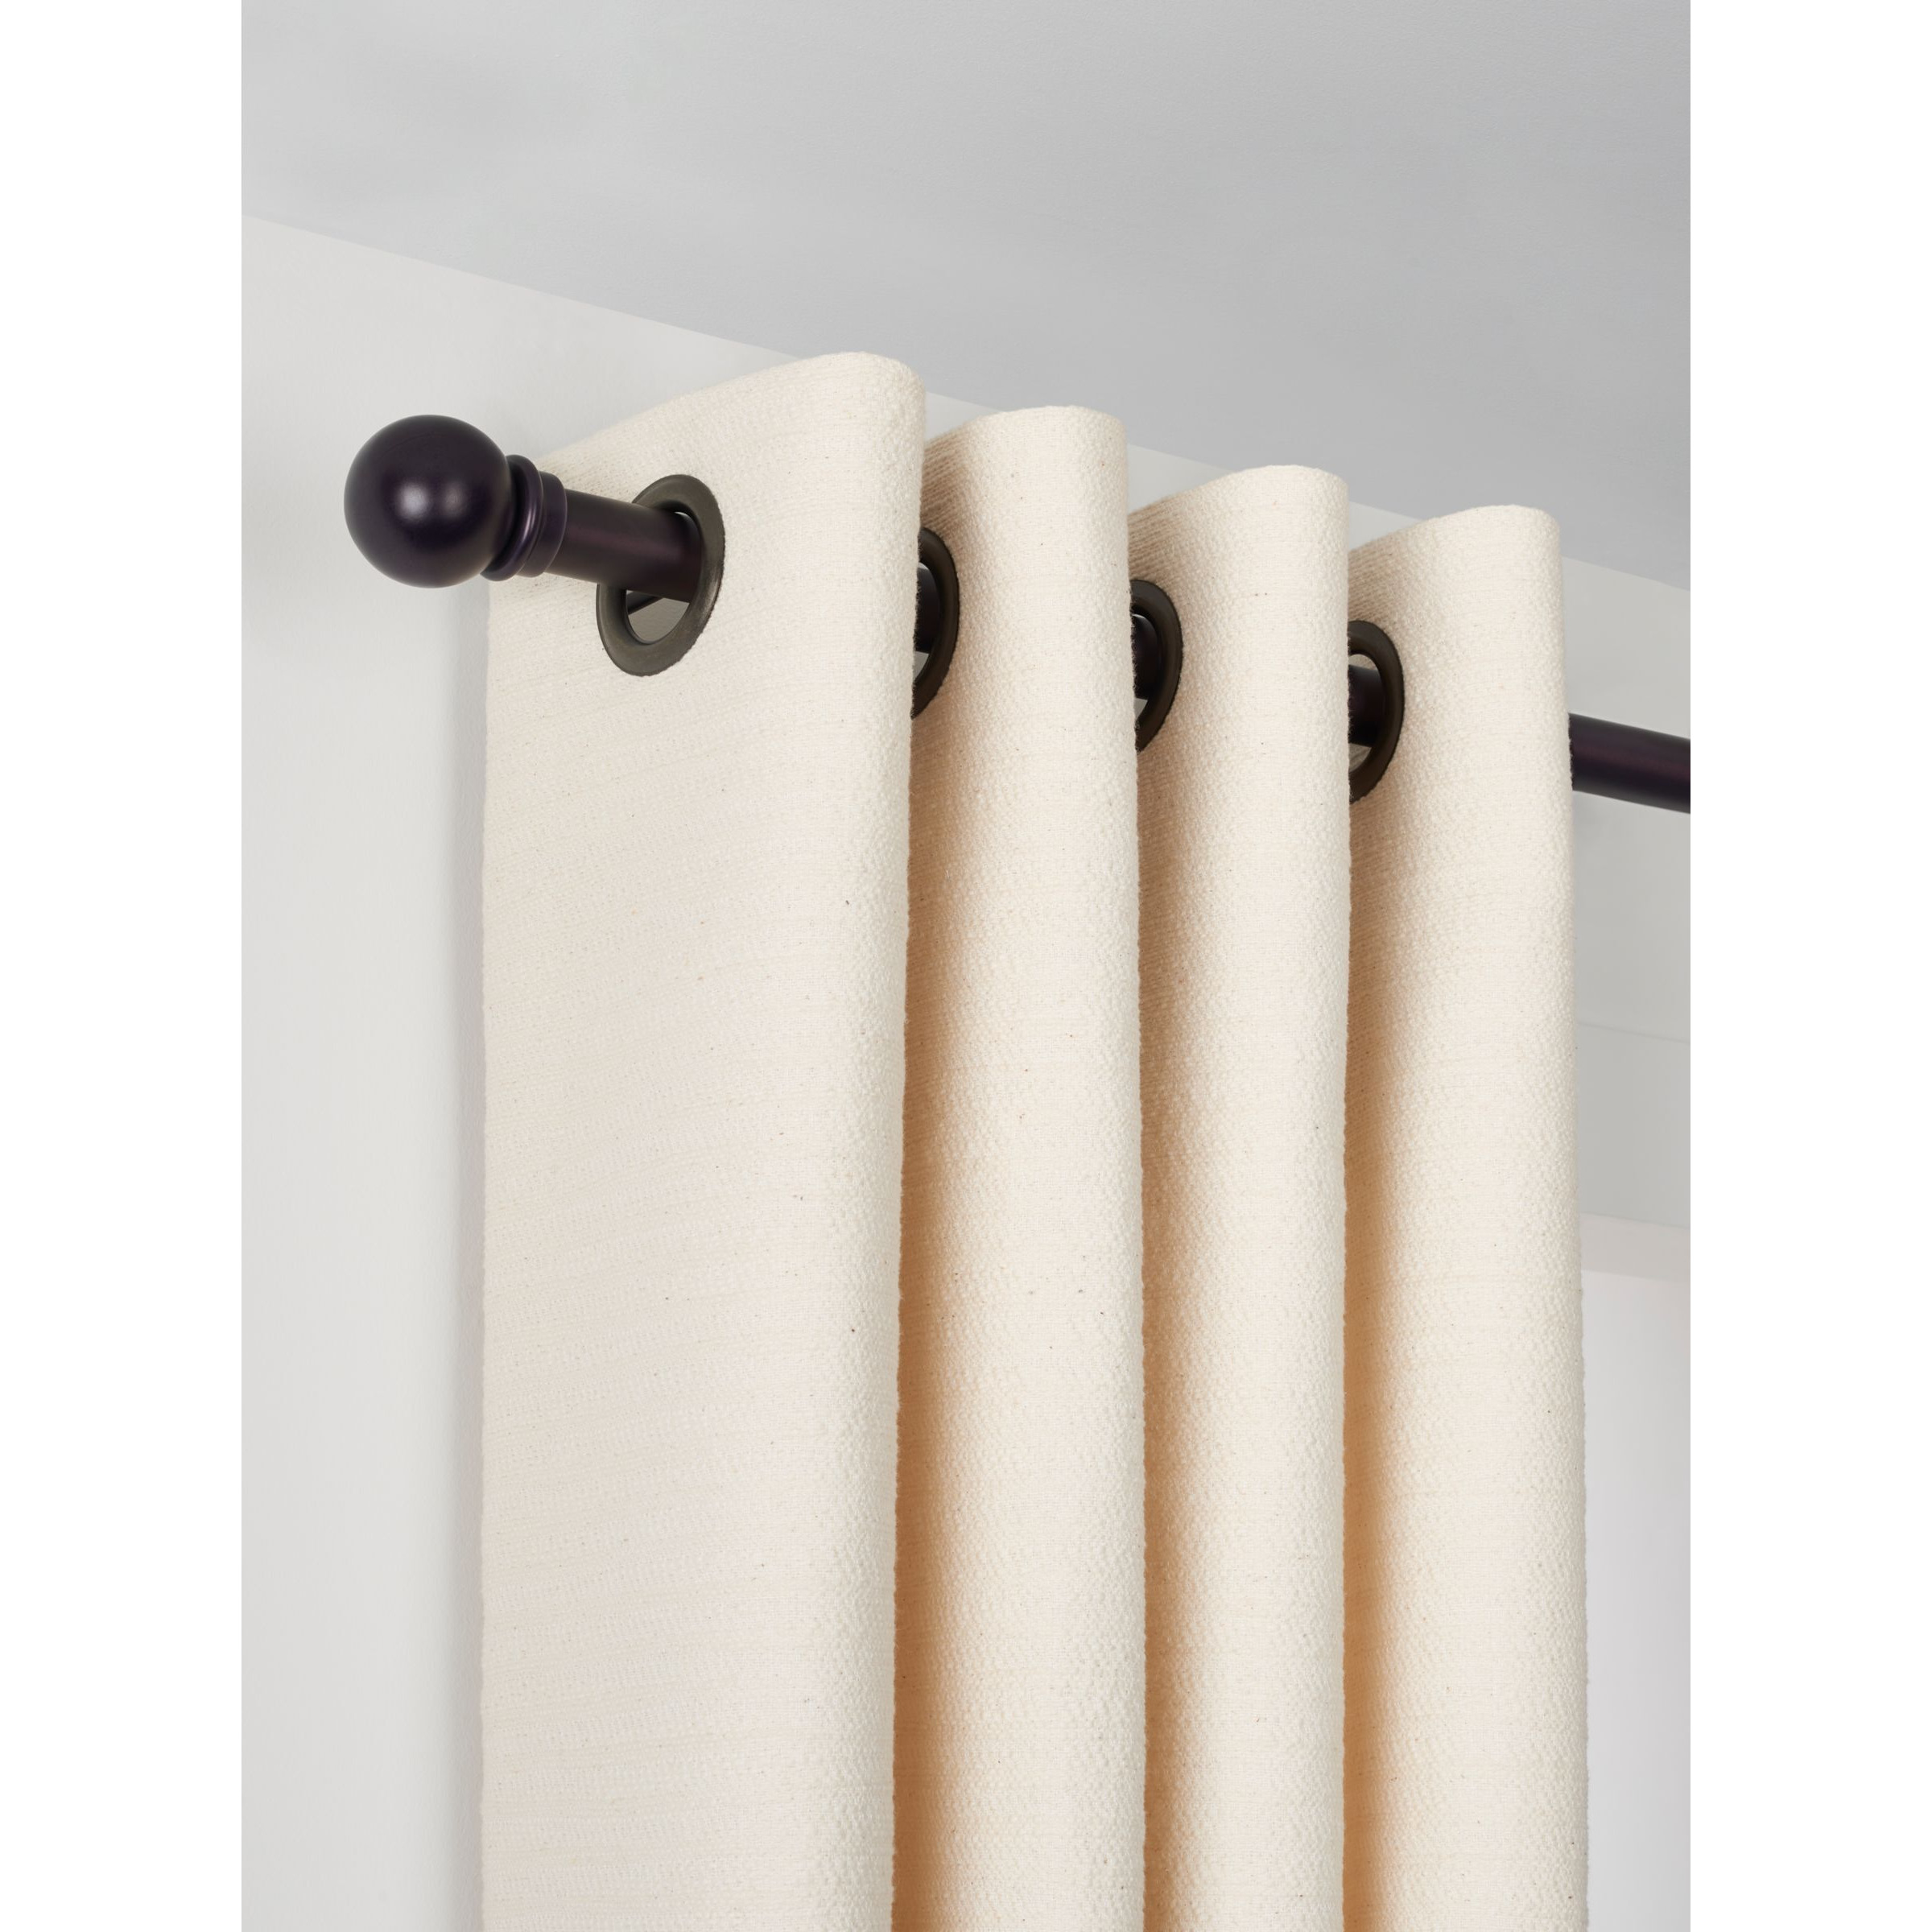 John Lewis Select Classic Eyelet Curtain Pole with Ball Finial, Wall Fix, Dia.25mm - image 1